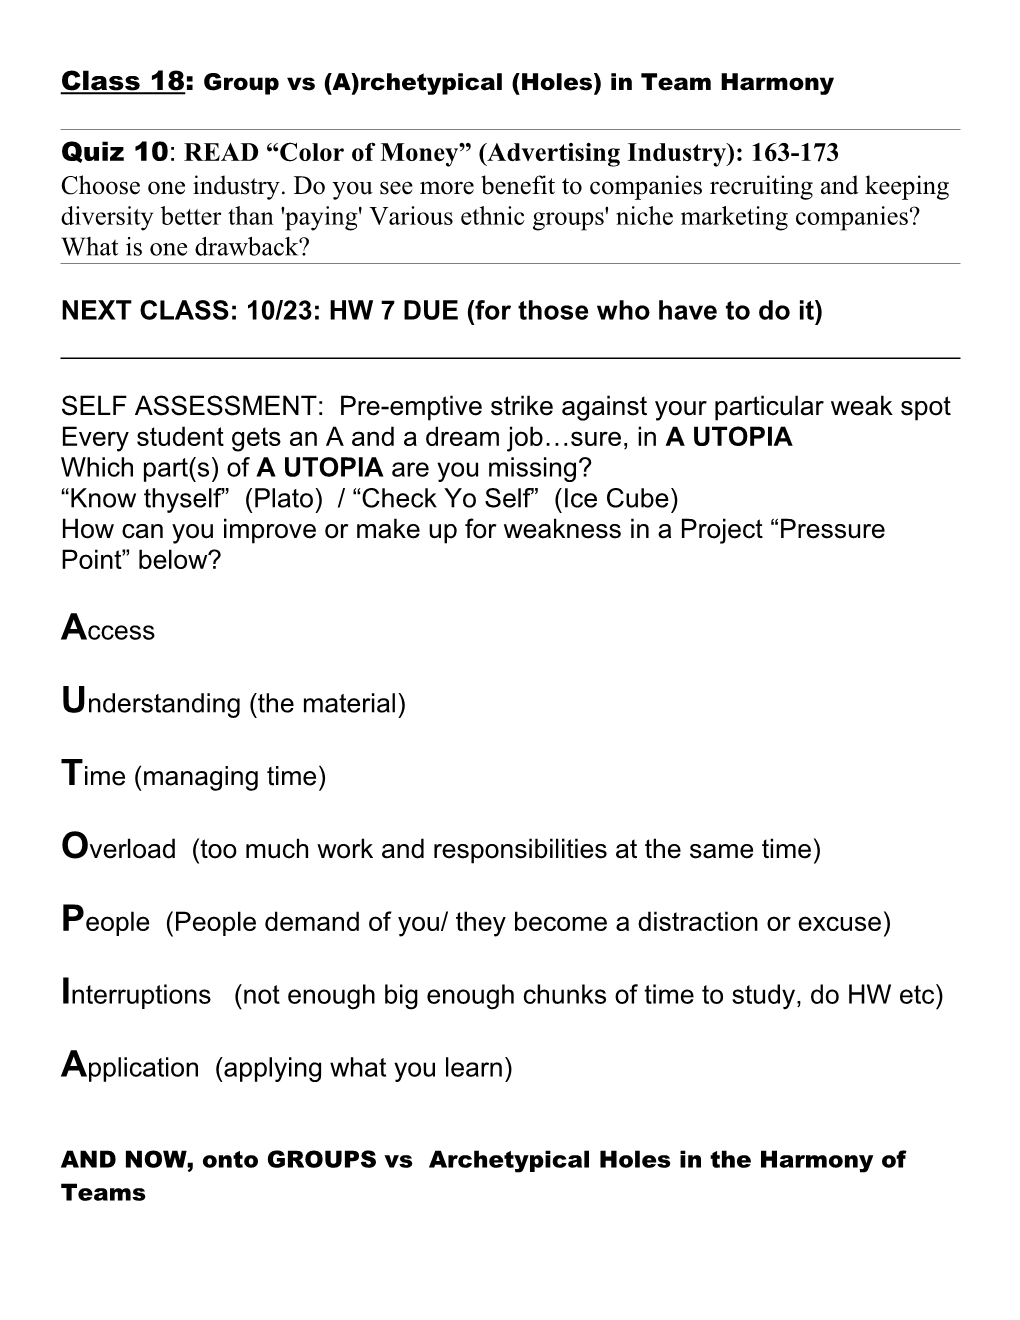 NEXT CLASS: 10/23: HW 7 DUE (For Those Who Have to Do It)